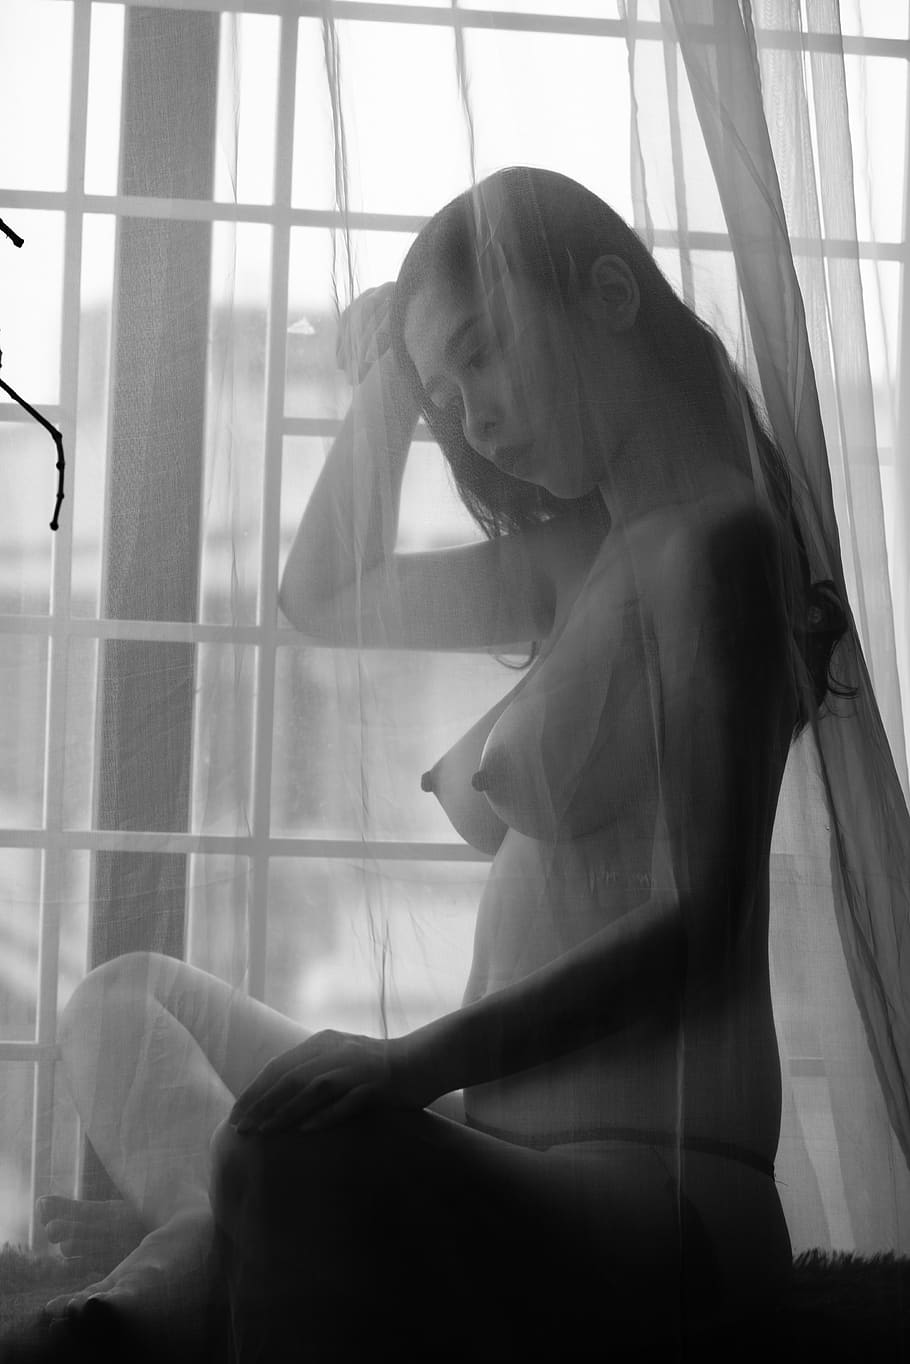 blinds, black and white, window, woman, portrait, asia, beauty